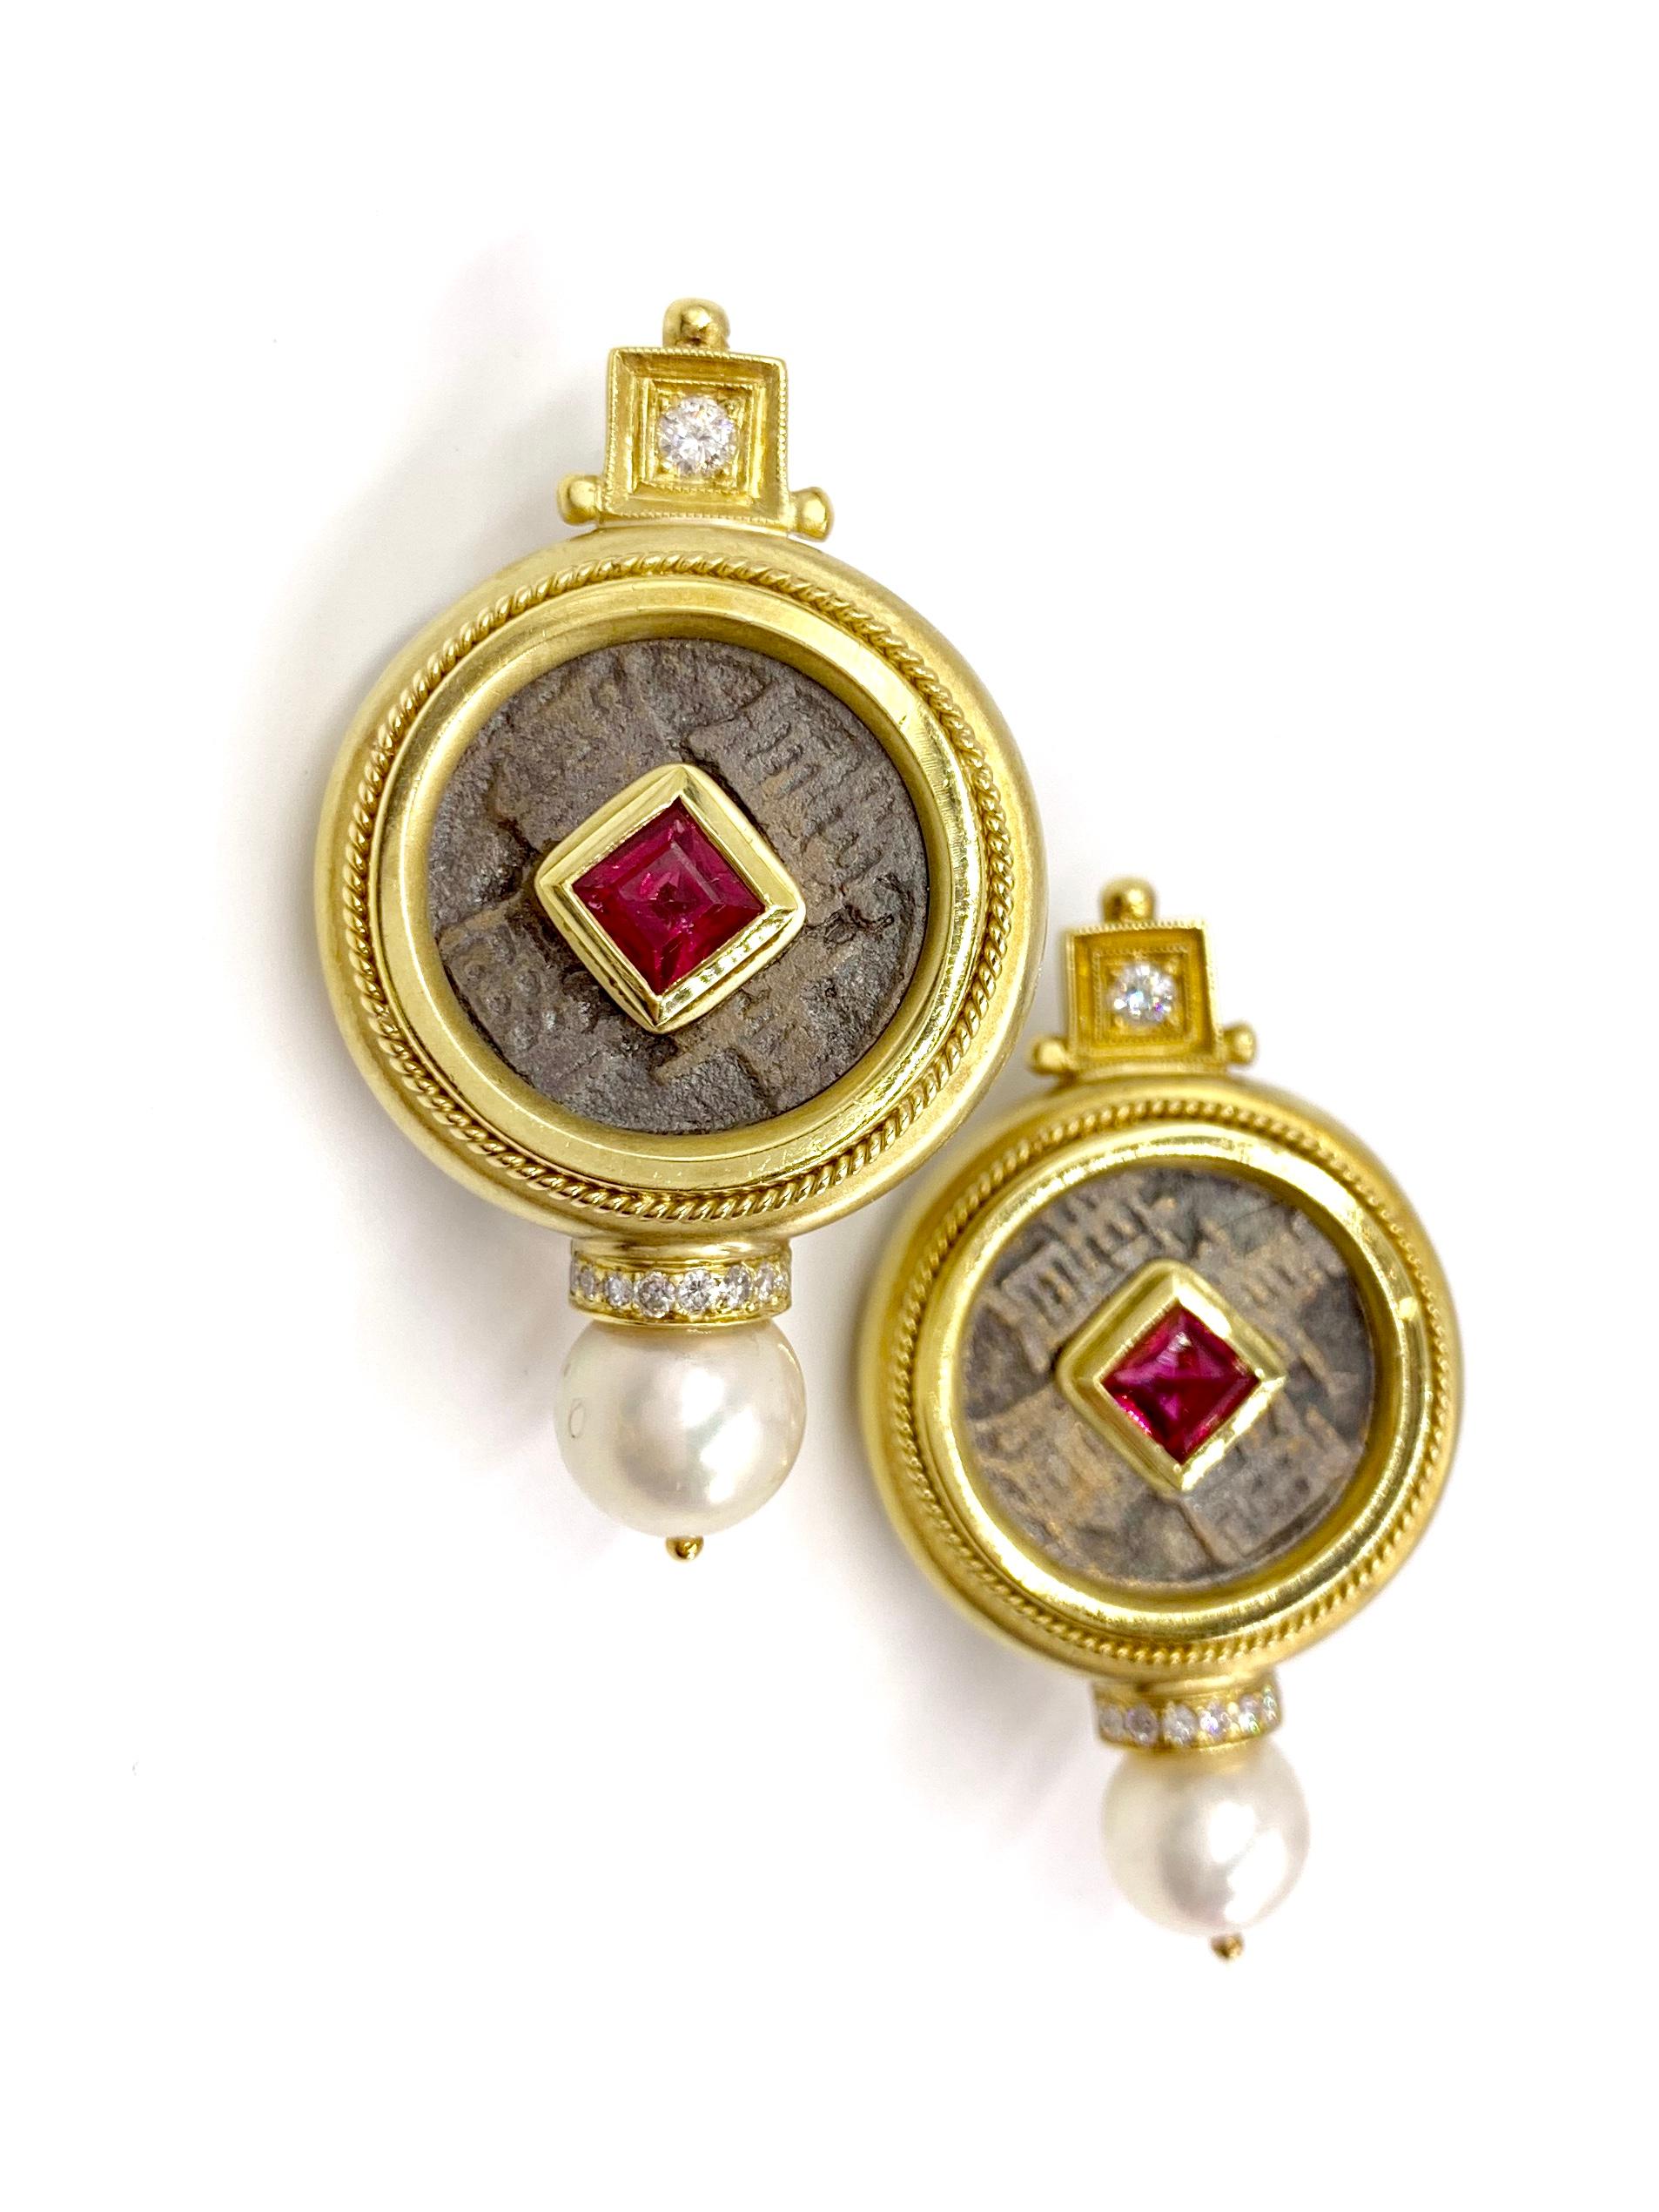 Hand made large 18 karat yellow gold Greek revival designed earrings featuring a bronzed coin with a princess cut tourmaline center, round diamond accents and a single 9mm white cultured pearl drop. Total diamond weight is approximately .26 carats